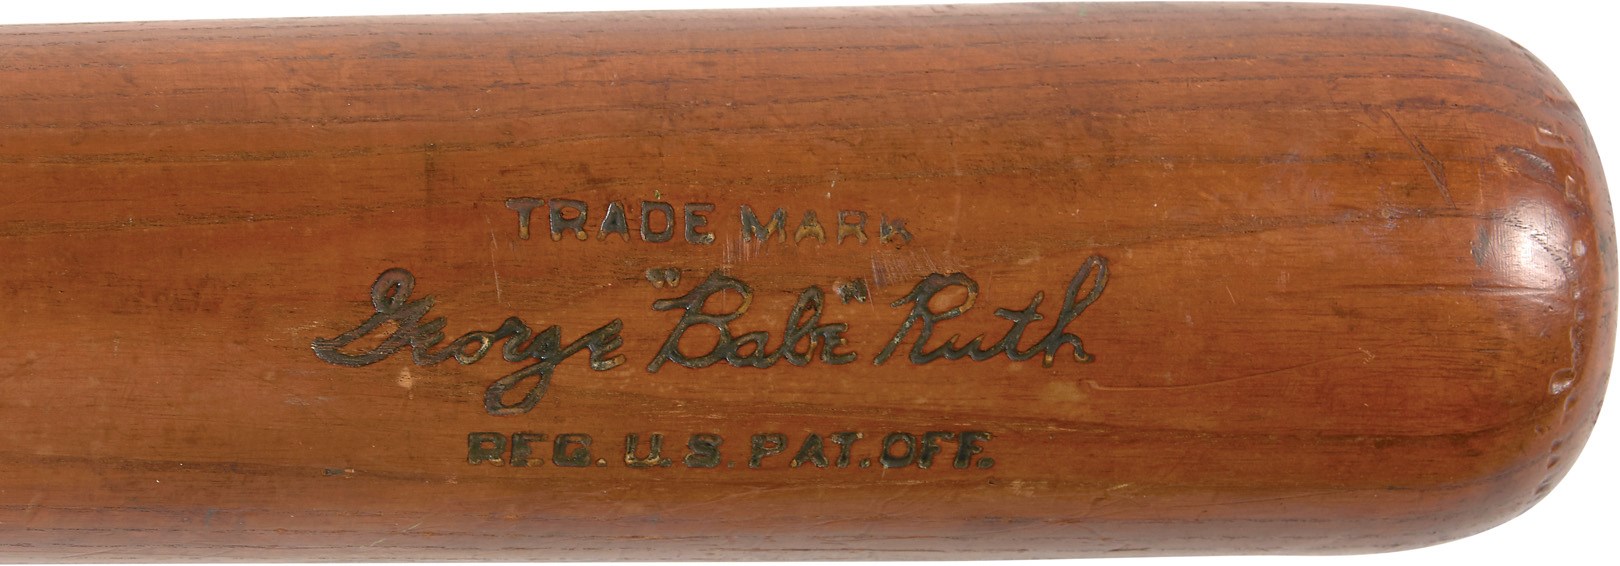 1932 Babe Ruth Game Used Bat with "Called Shot" Consideration (PSA/DNA 10)